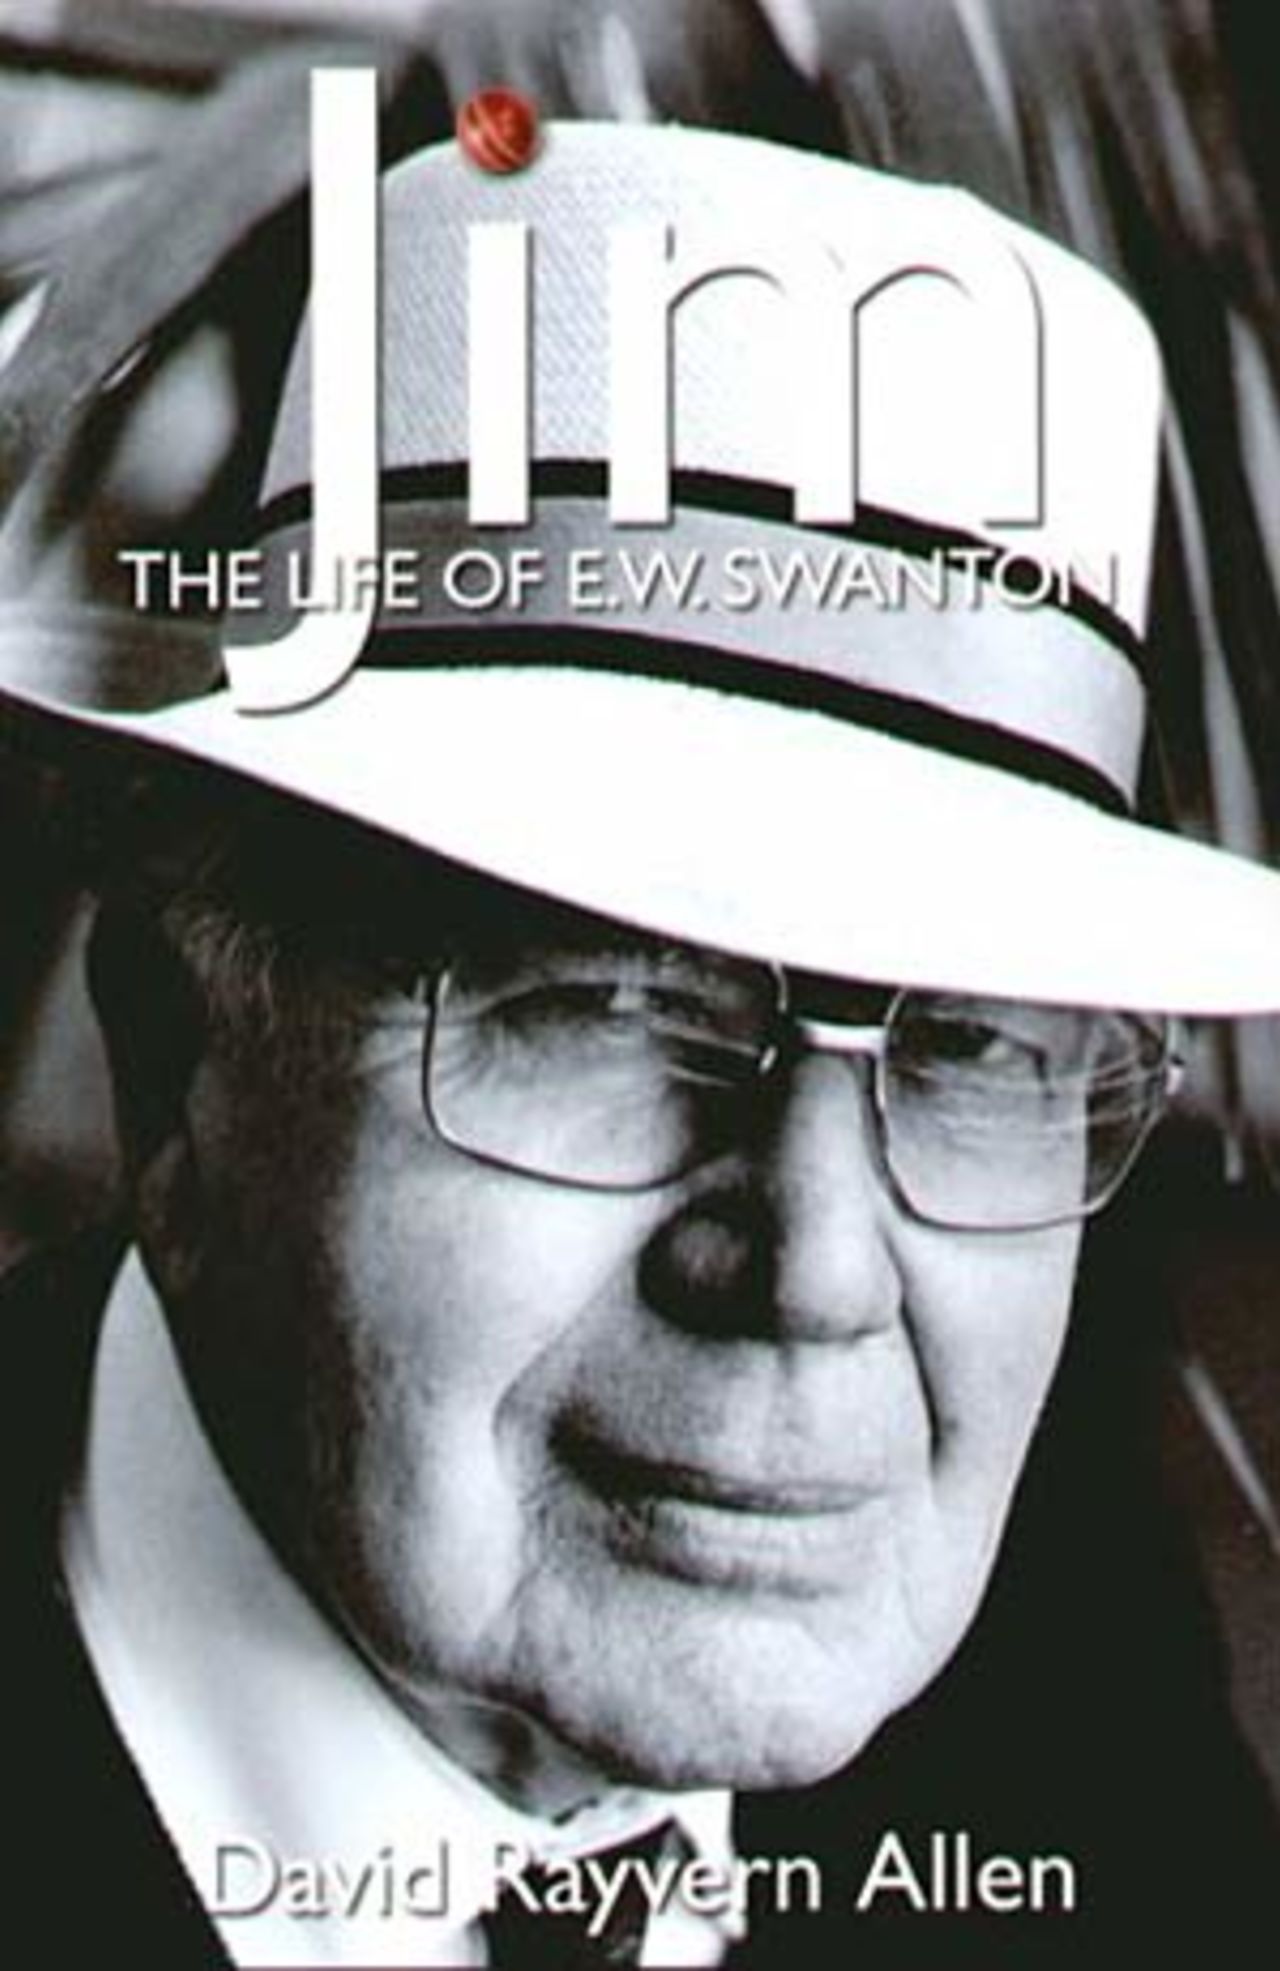 The cover of <I>Jim: The Life of EW Swanton</I> by David Rayvern Allen